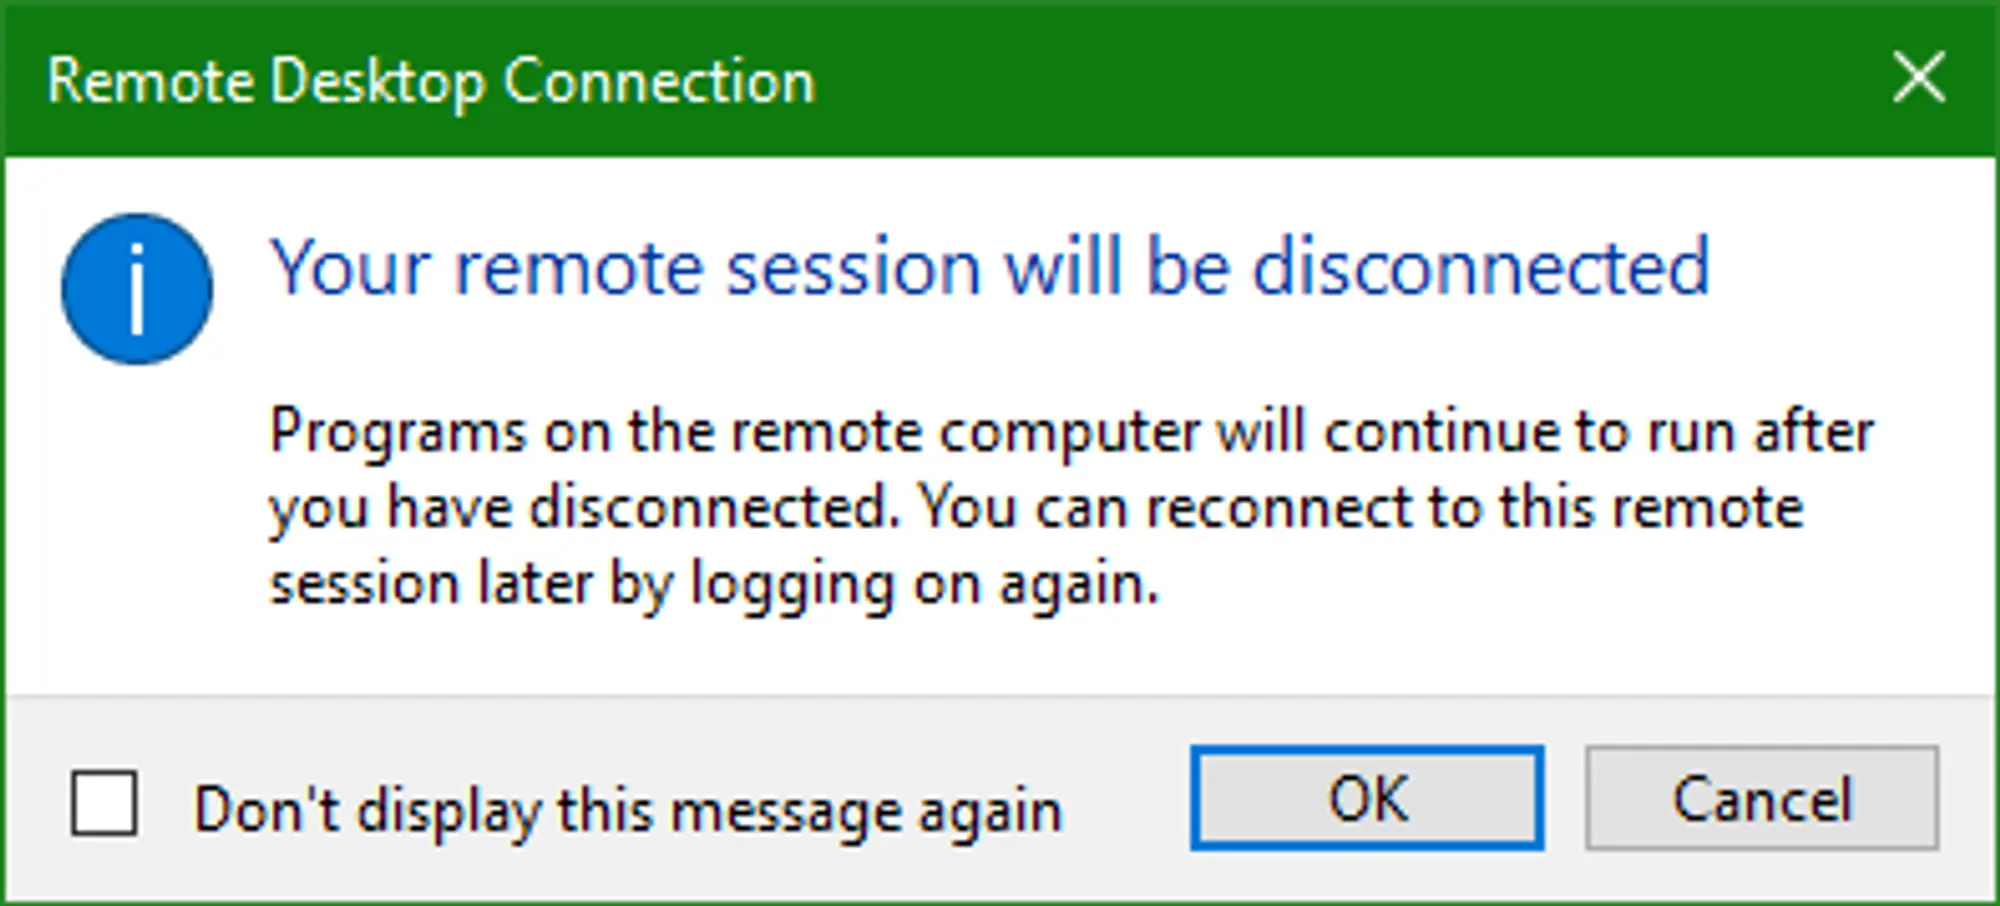 A popup provided by the Remote Desktop Connection Application notifying you that “Your remote session will be disconnected”. The bottom right of the popup has two button, “OK” and “Cancel, with “OK” being selected by default.
On the bottom left there’s a check box with the text “Don’t display this message again” which is unchecked by default. 